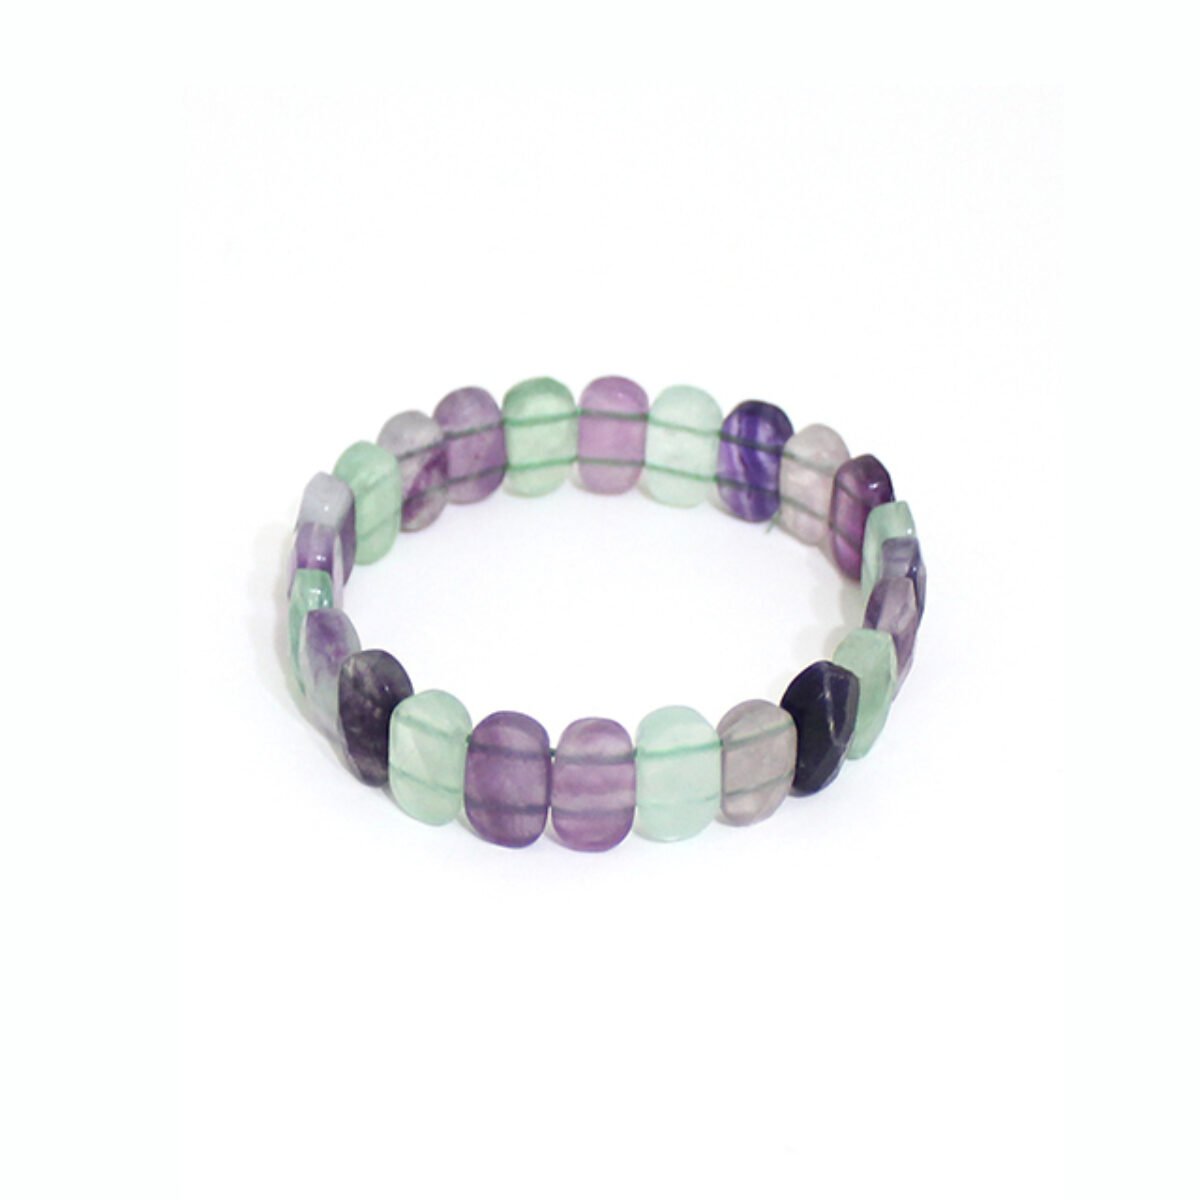 Bracelet for Clarity in Thought & Decision Making Crystal Shop Online